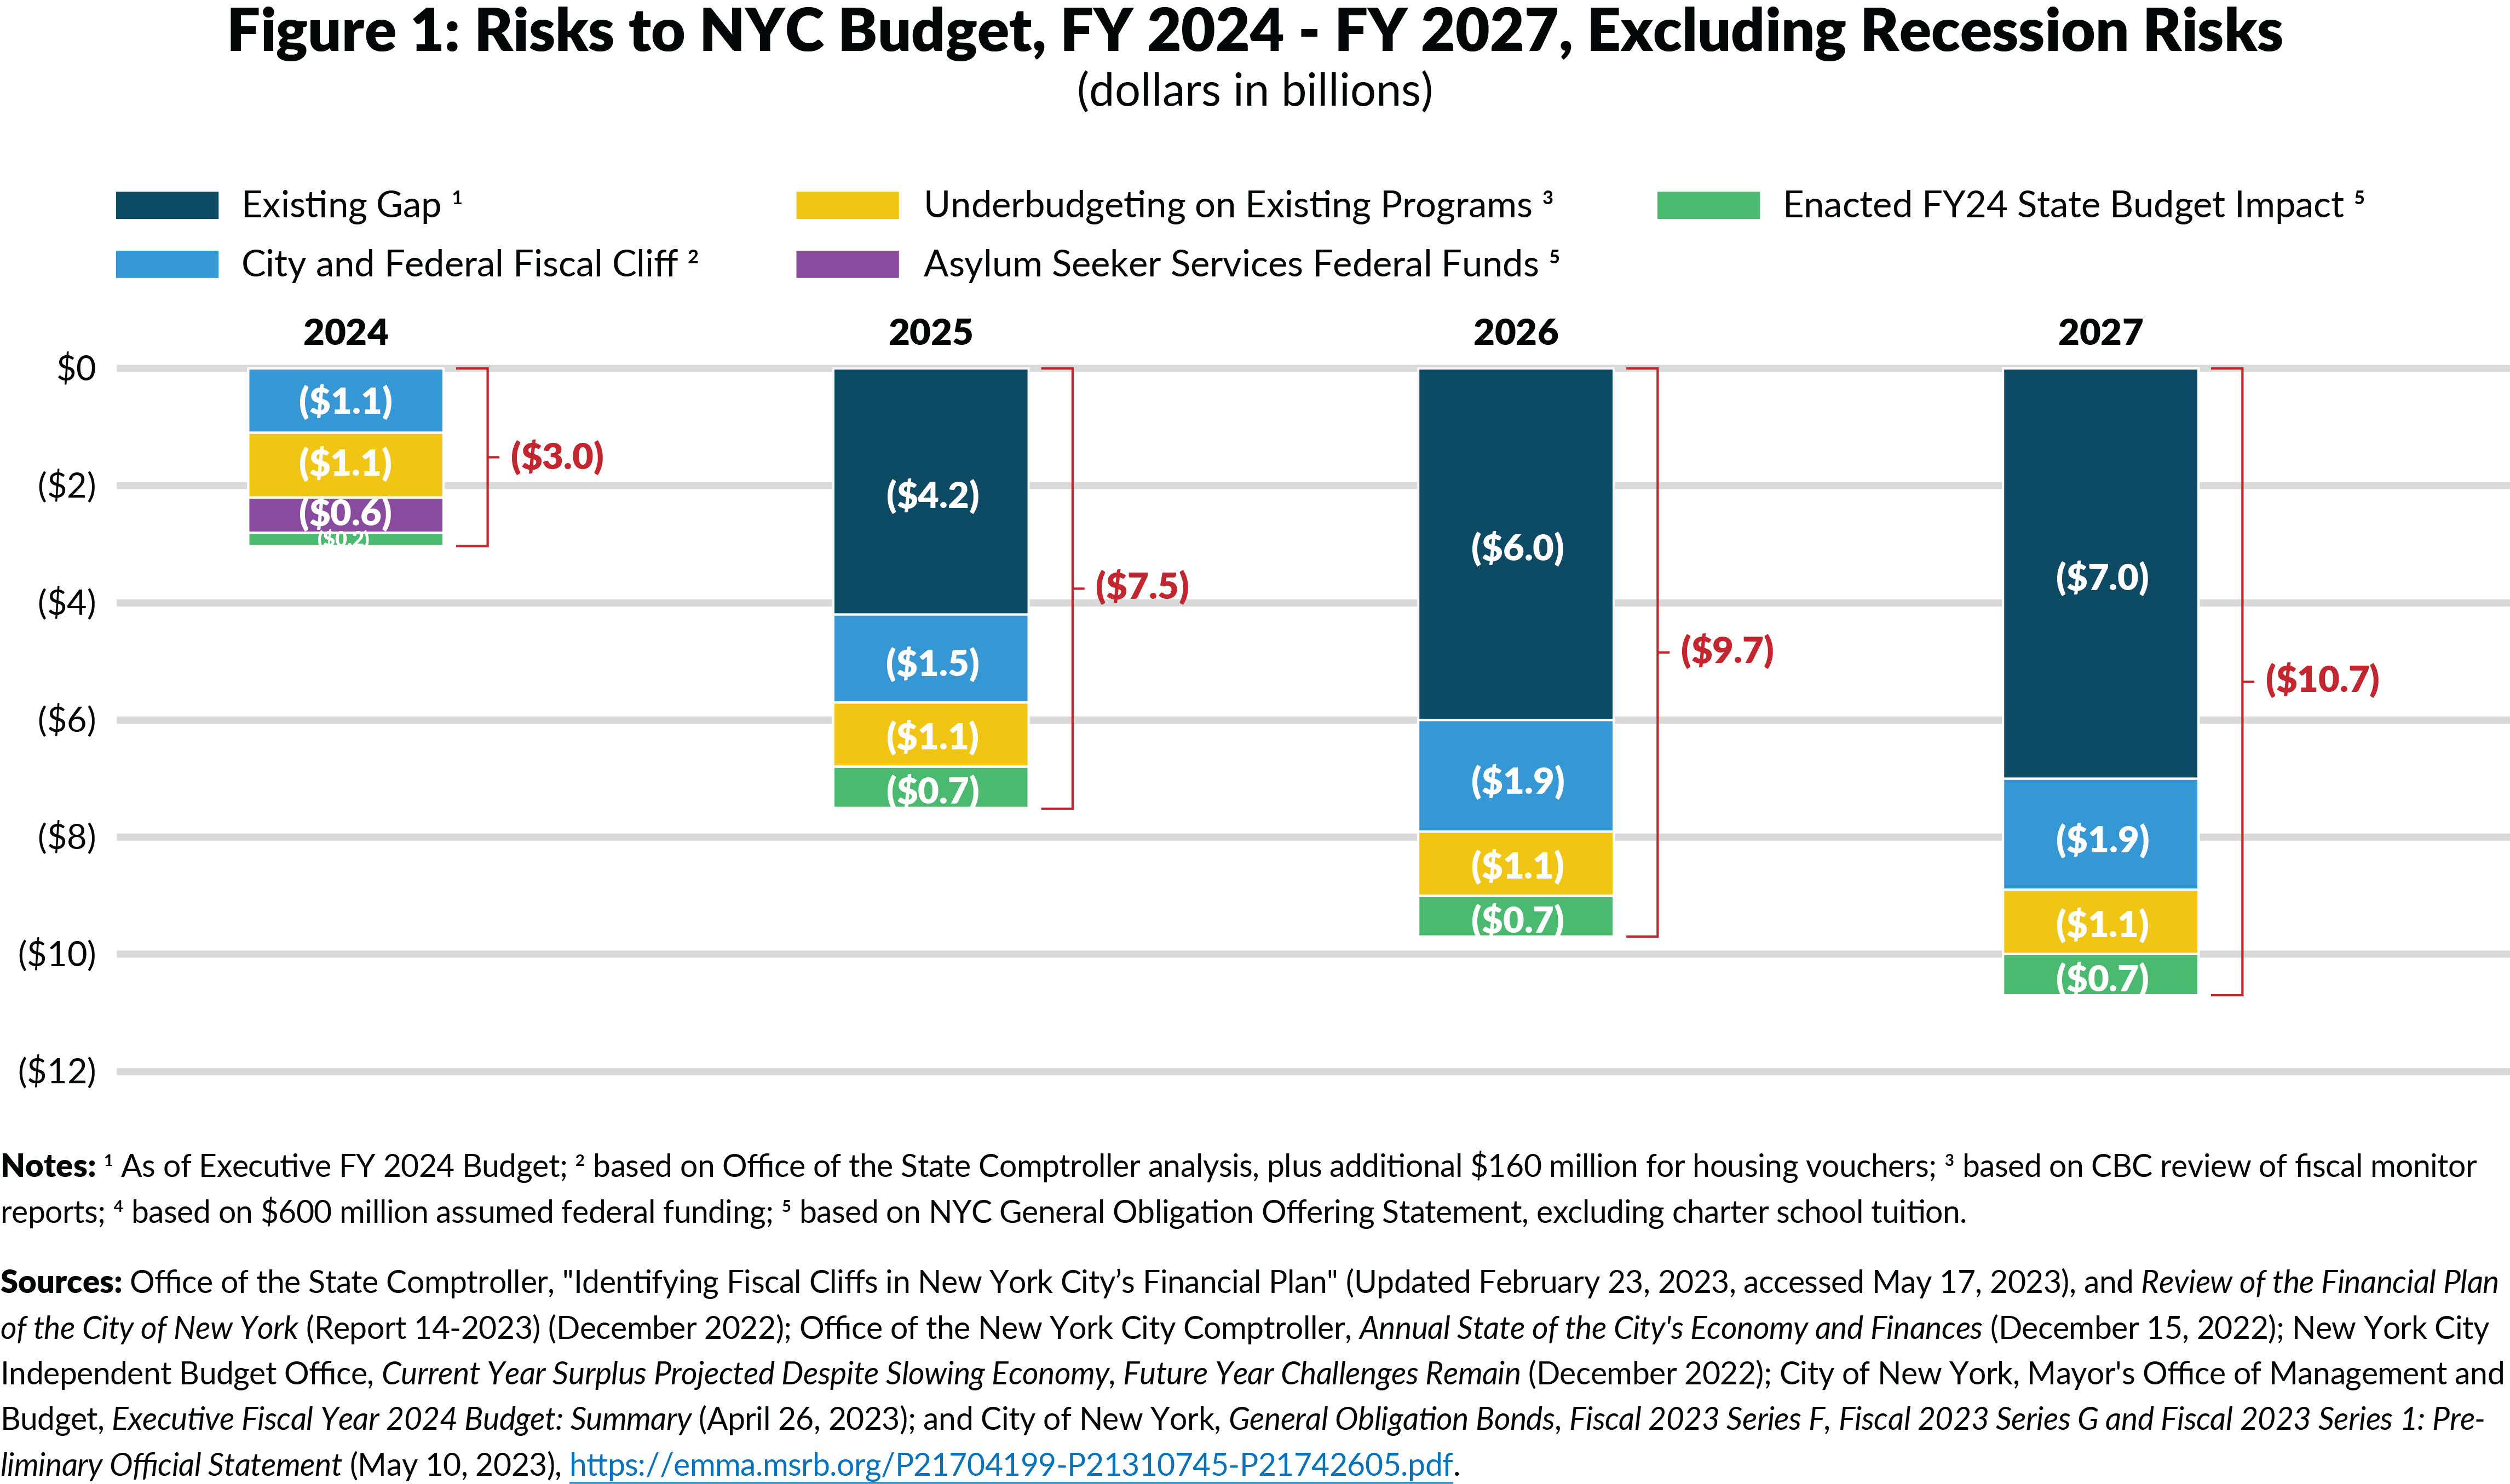 Figure 1: Risks to NYC Budget, FY 2024 - FY 2027, Excluding Recession Risks